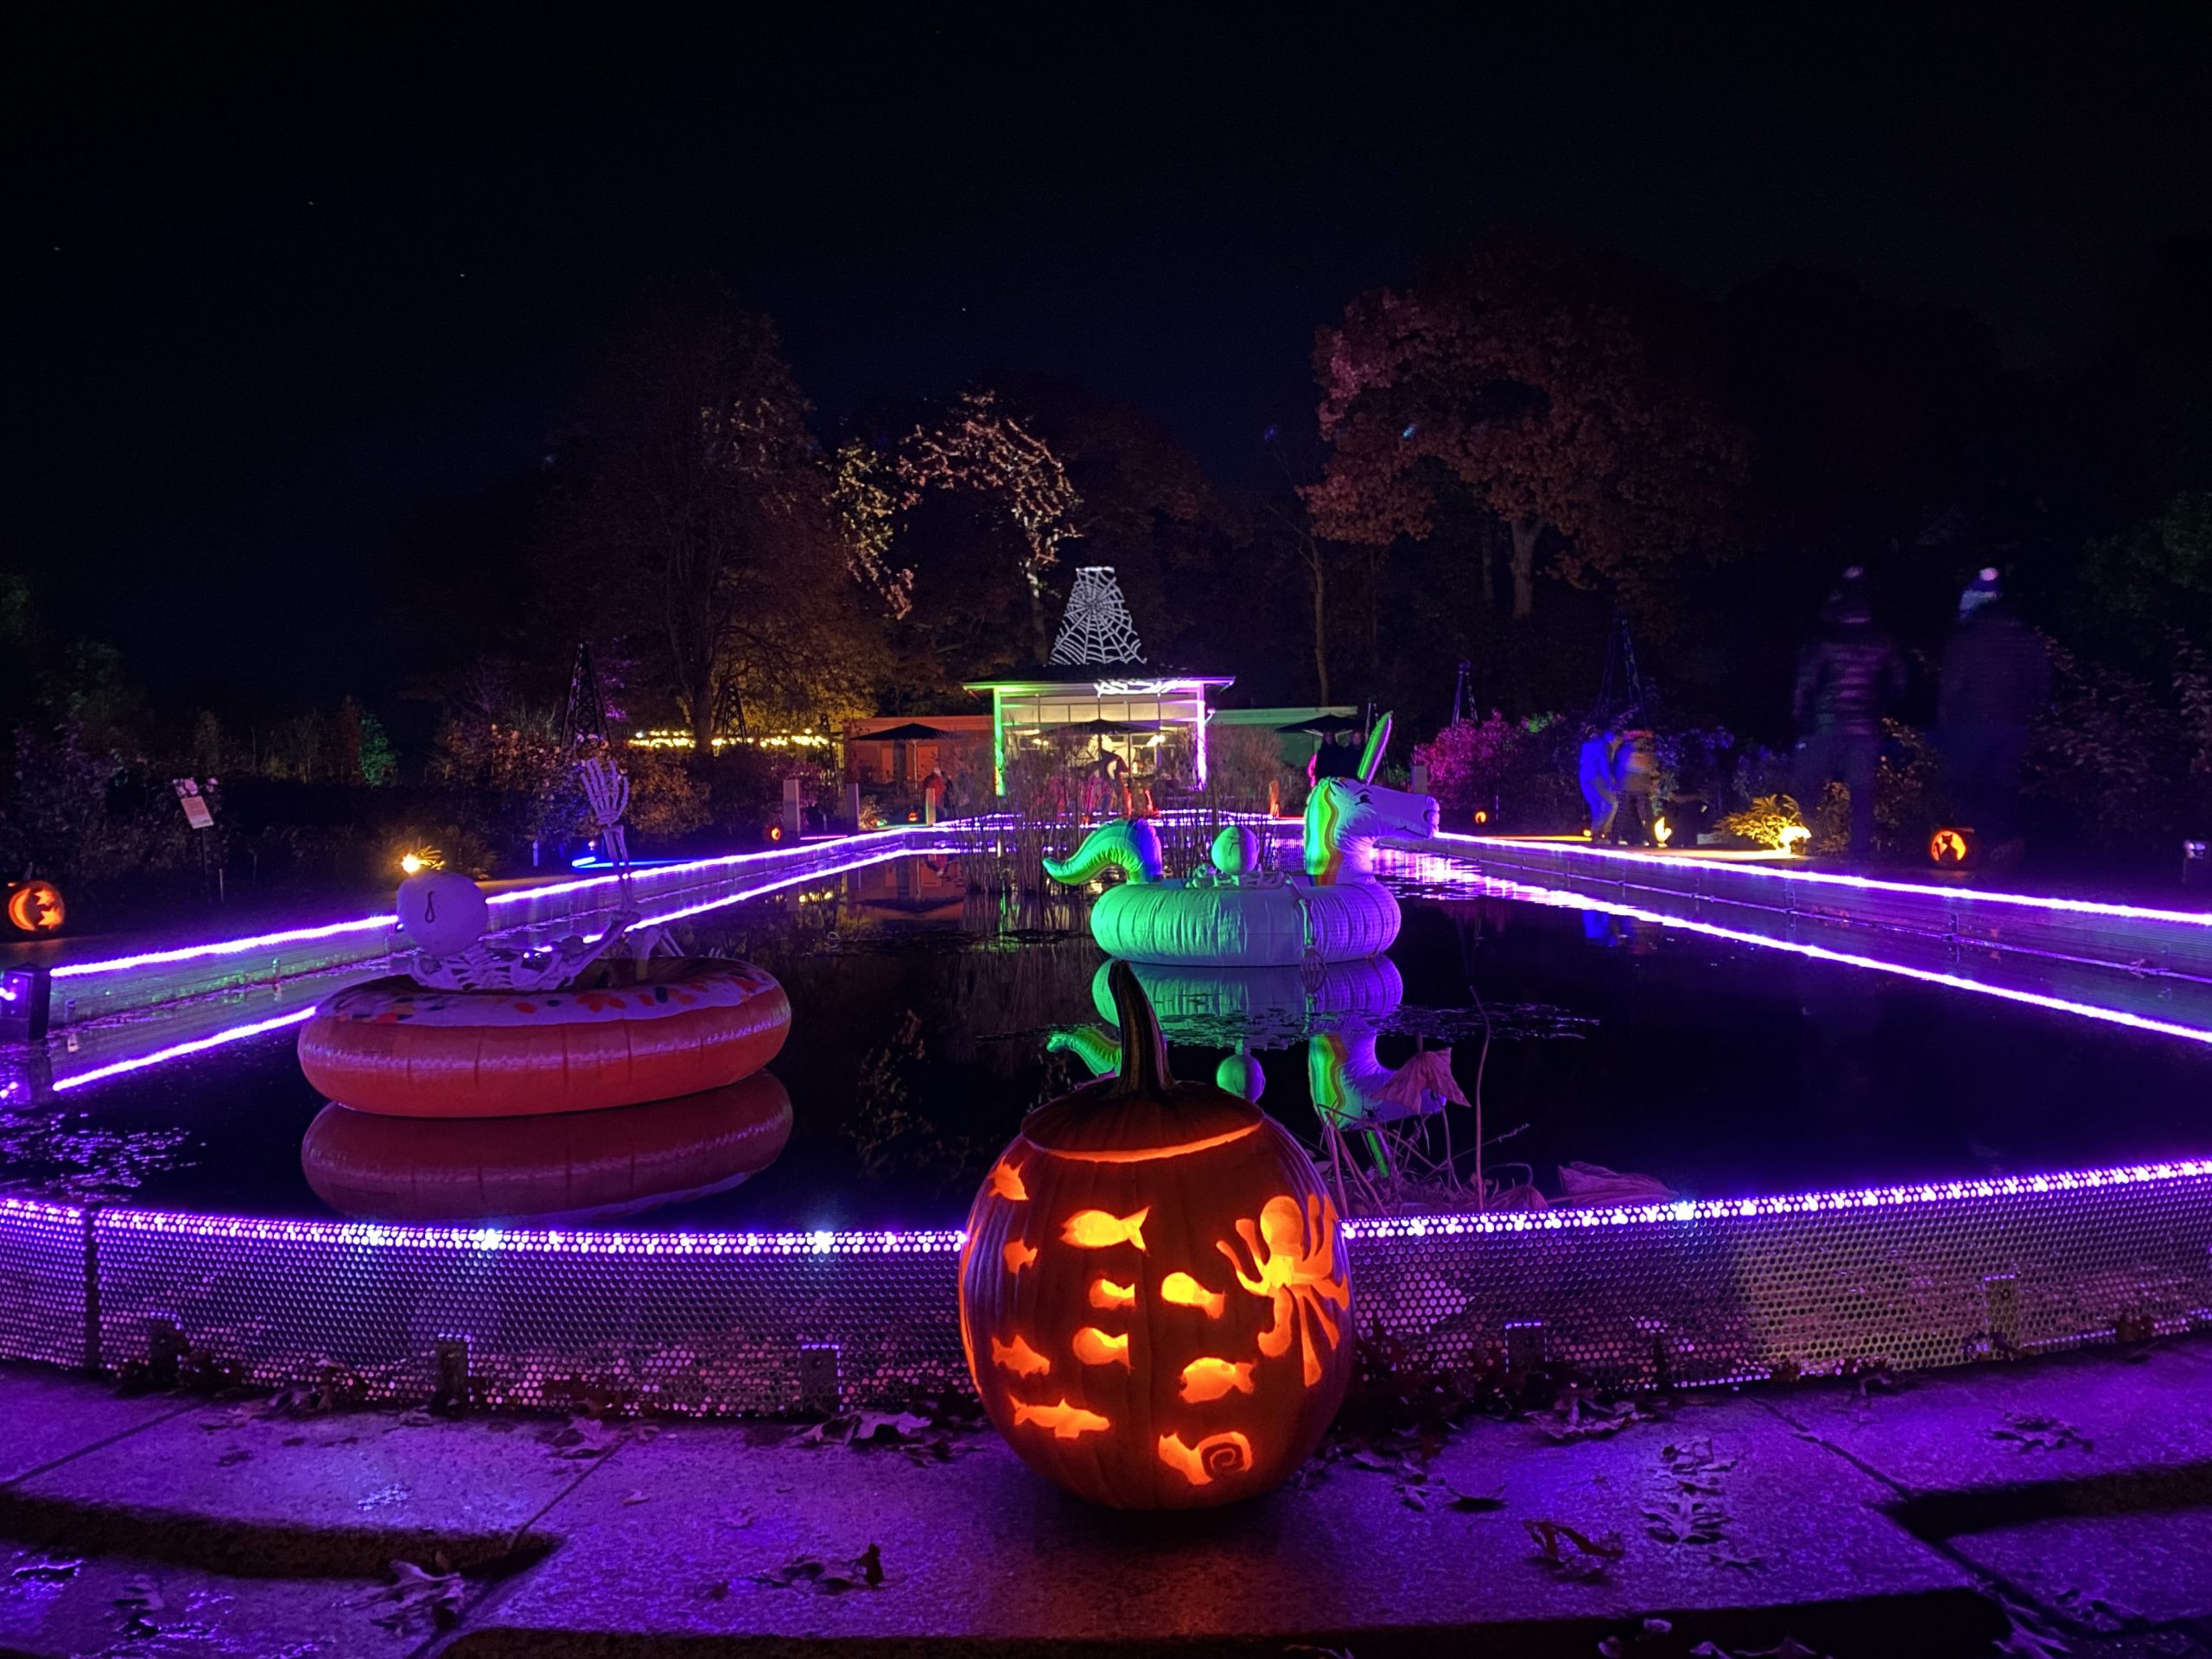 A jack o lantern decorated with fish sits at the end of the reflecting pond all lit up at night, skeletal forms floating in the water